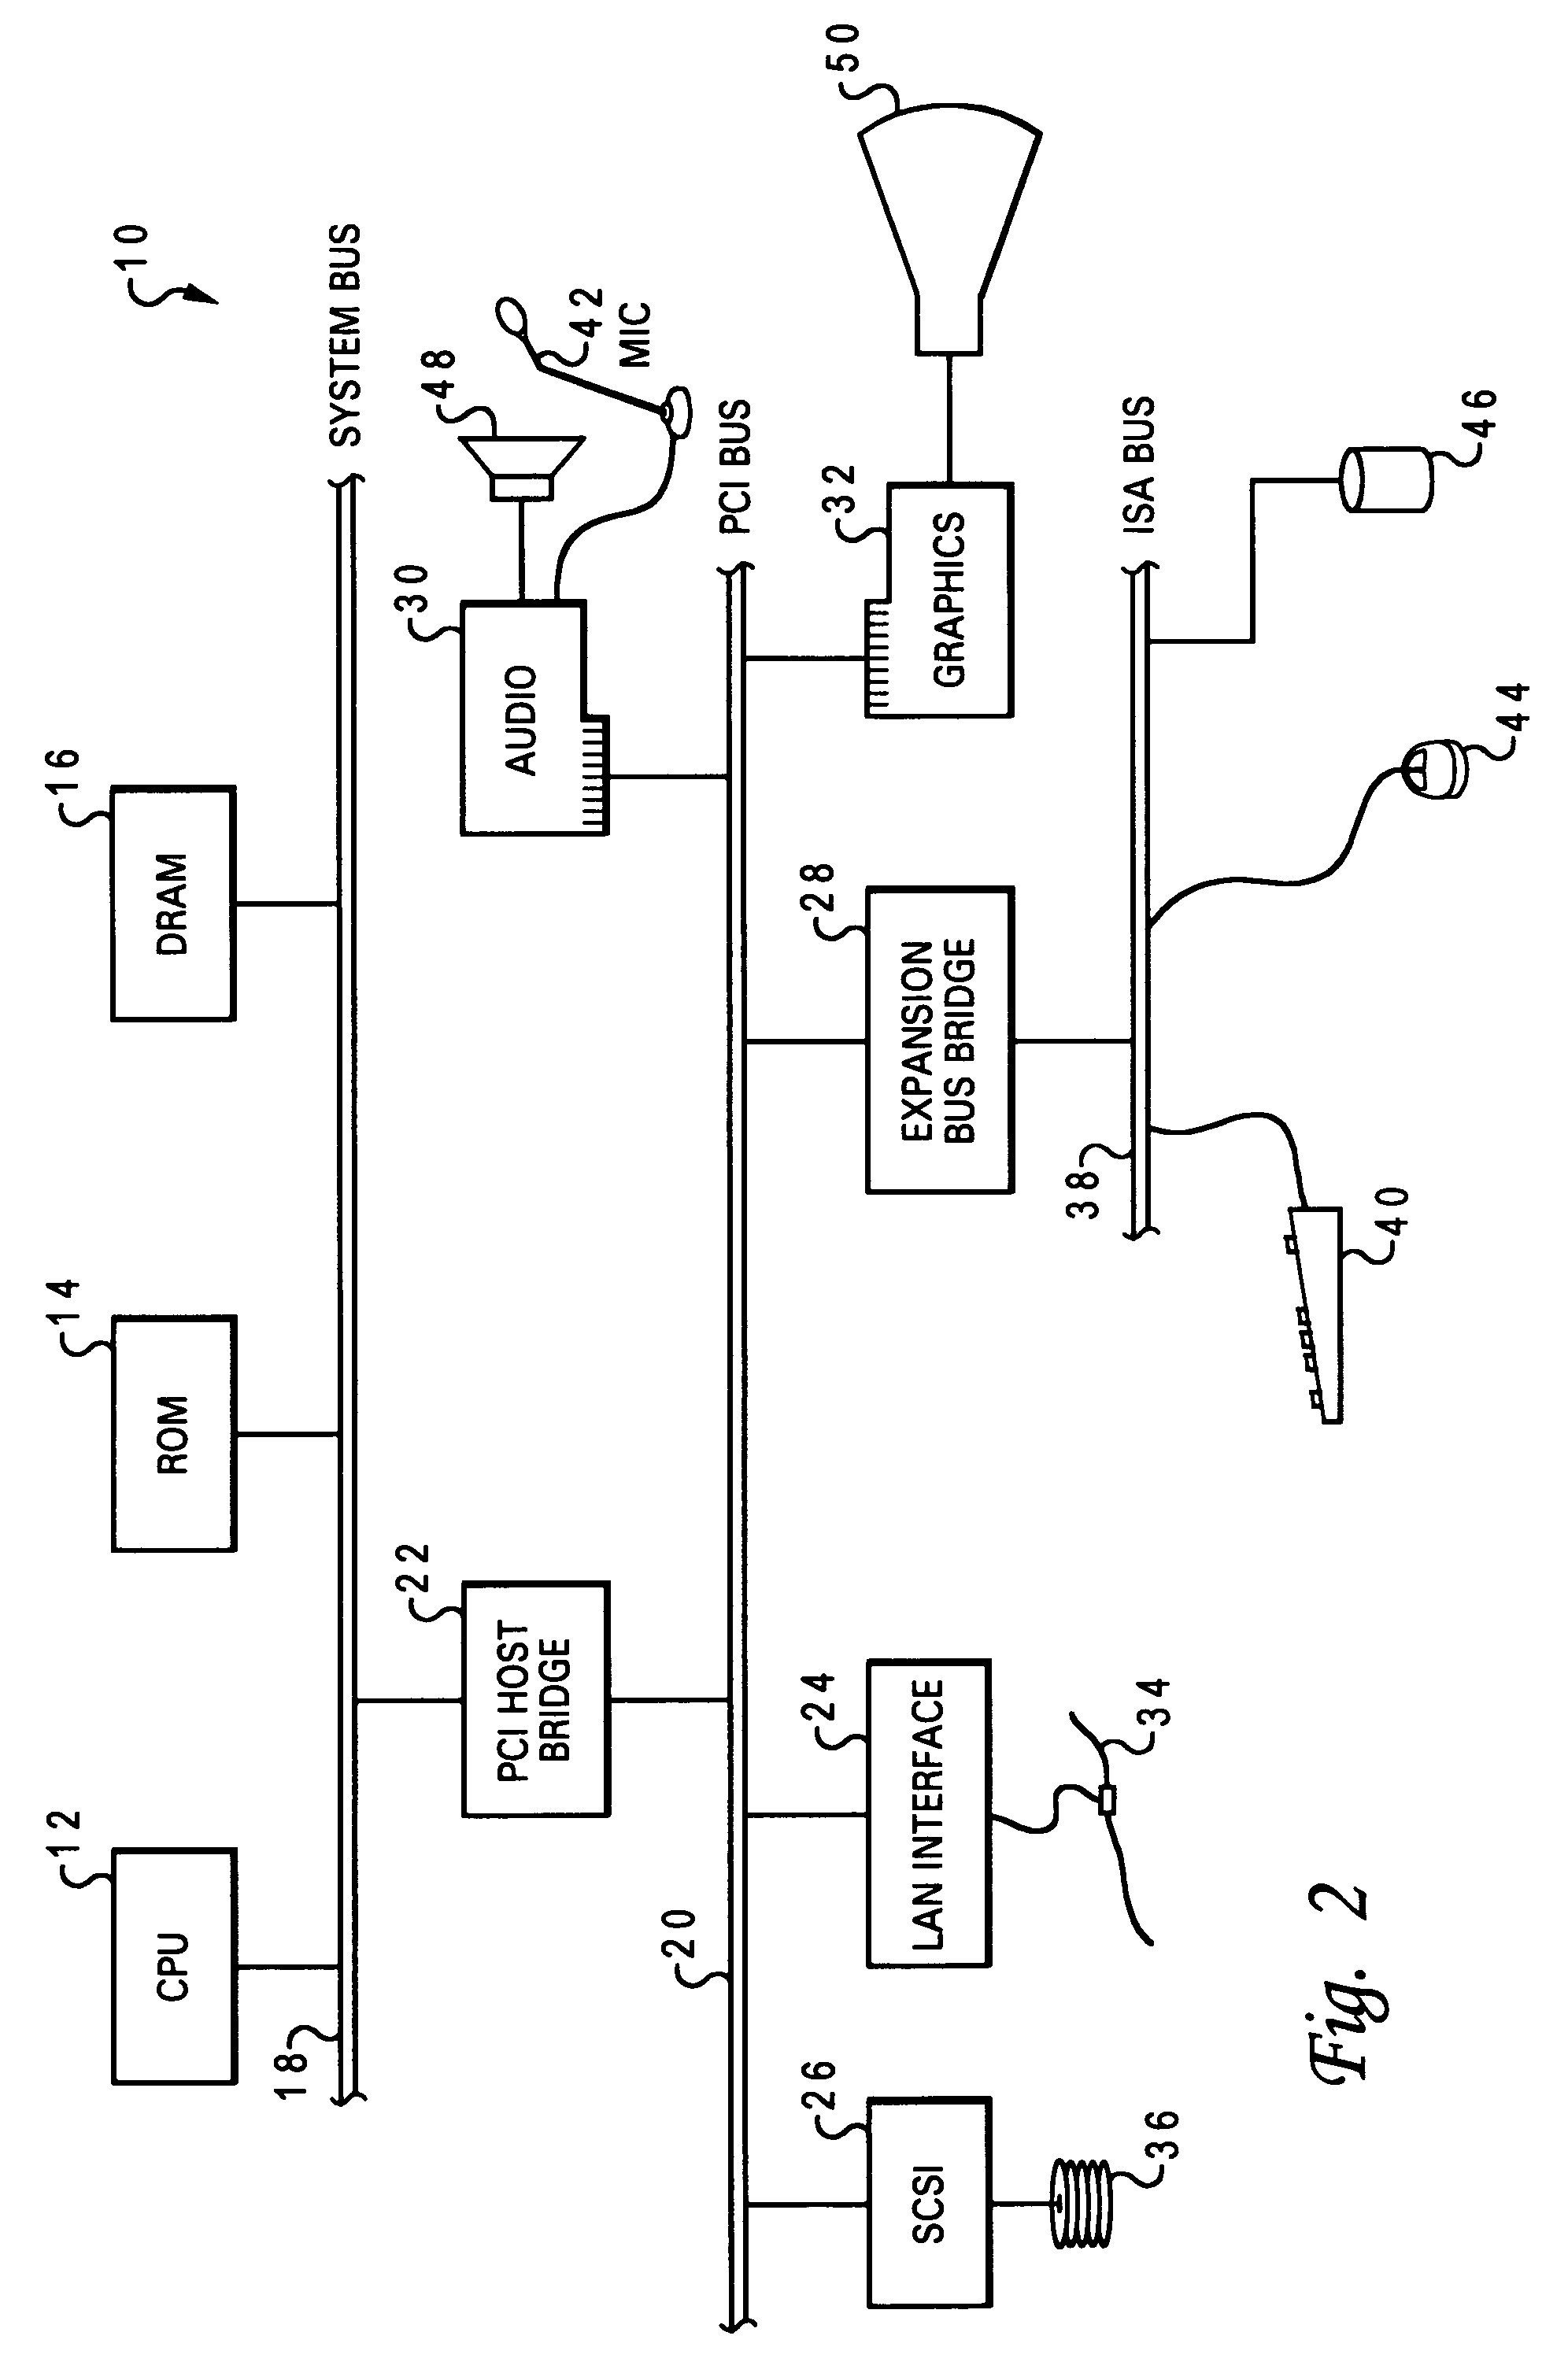 Method and system for automatically detecting and powering PC speakers